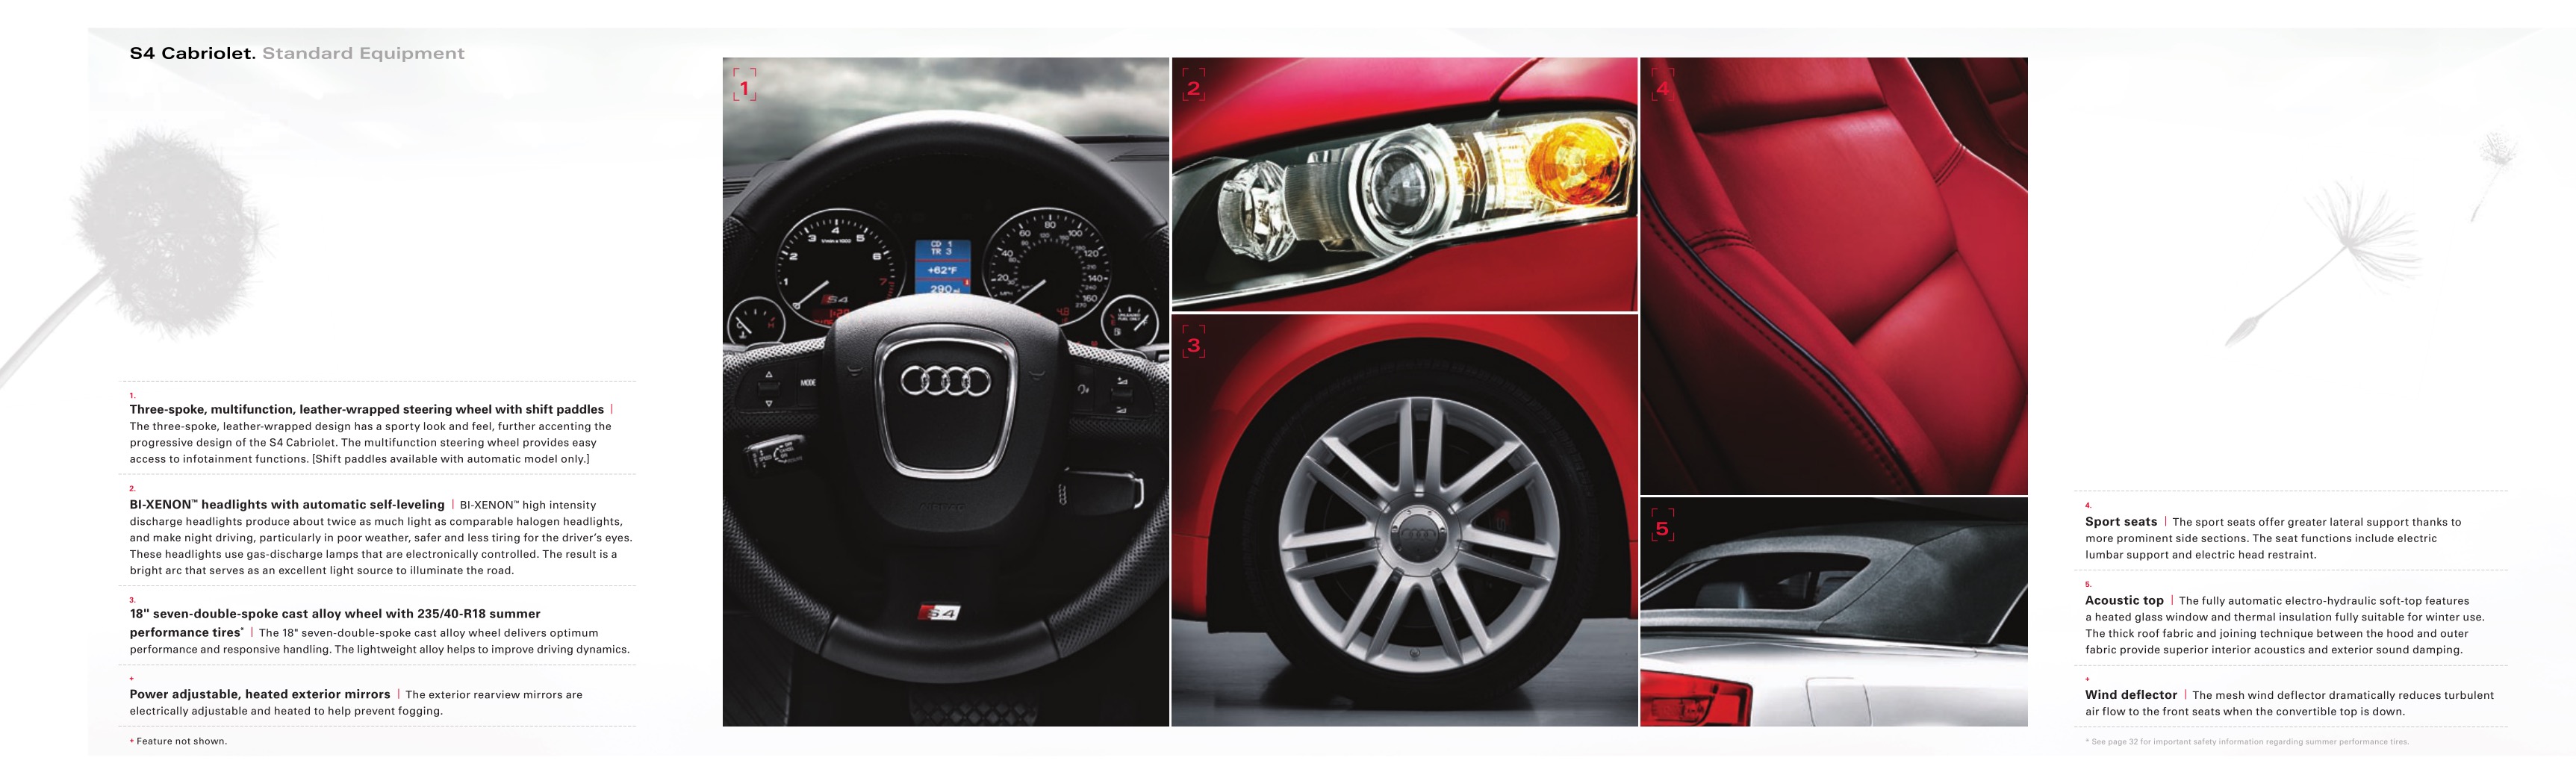 2009 Audi A4 Convertible Brochure Page 12